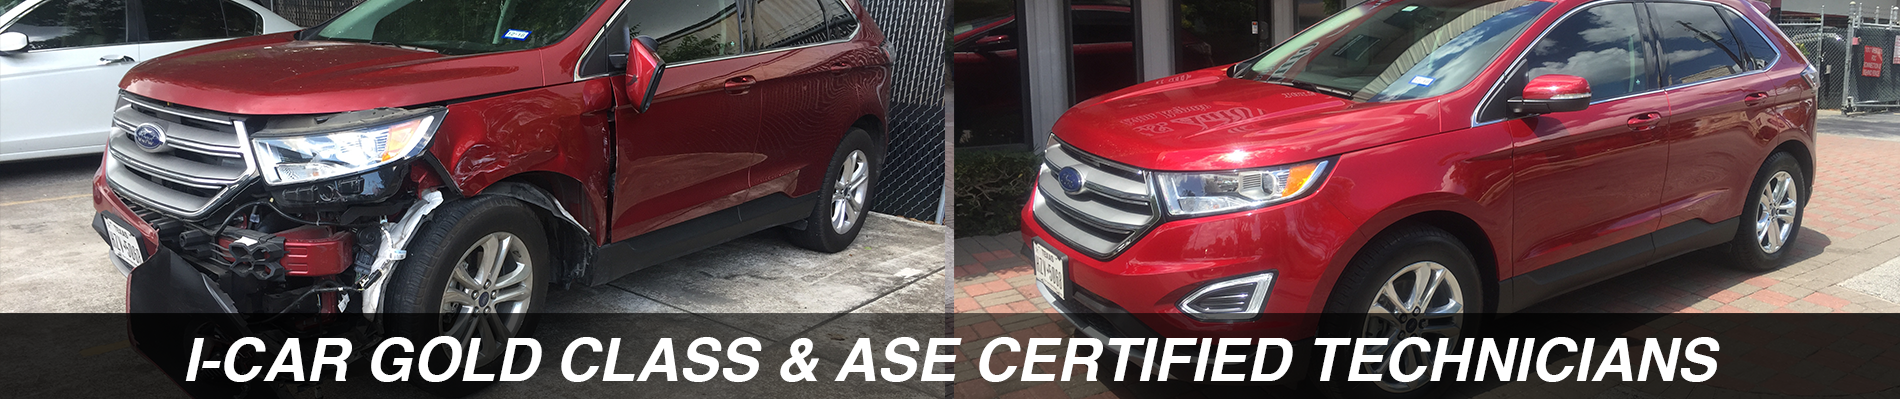 I-CAR Gold Class and ASE Certified Technicians